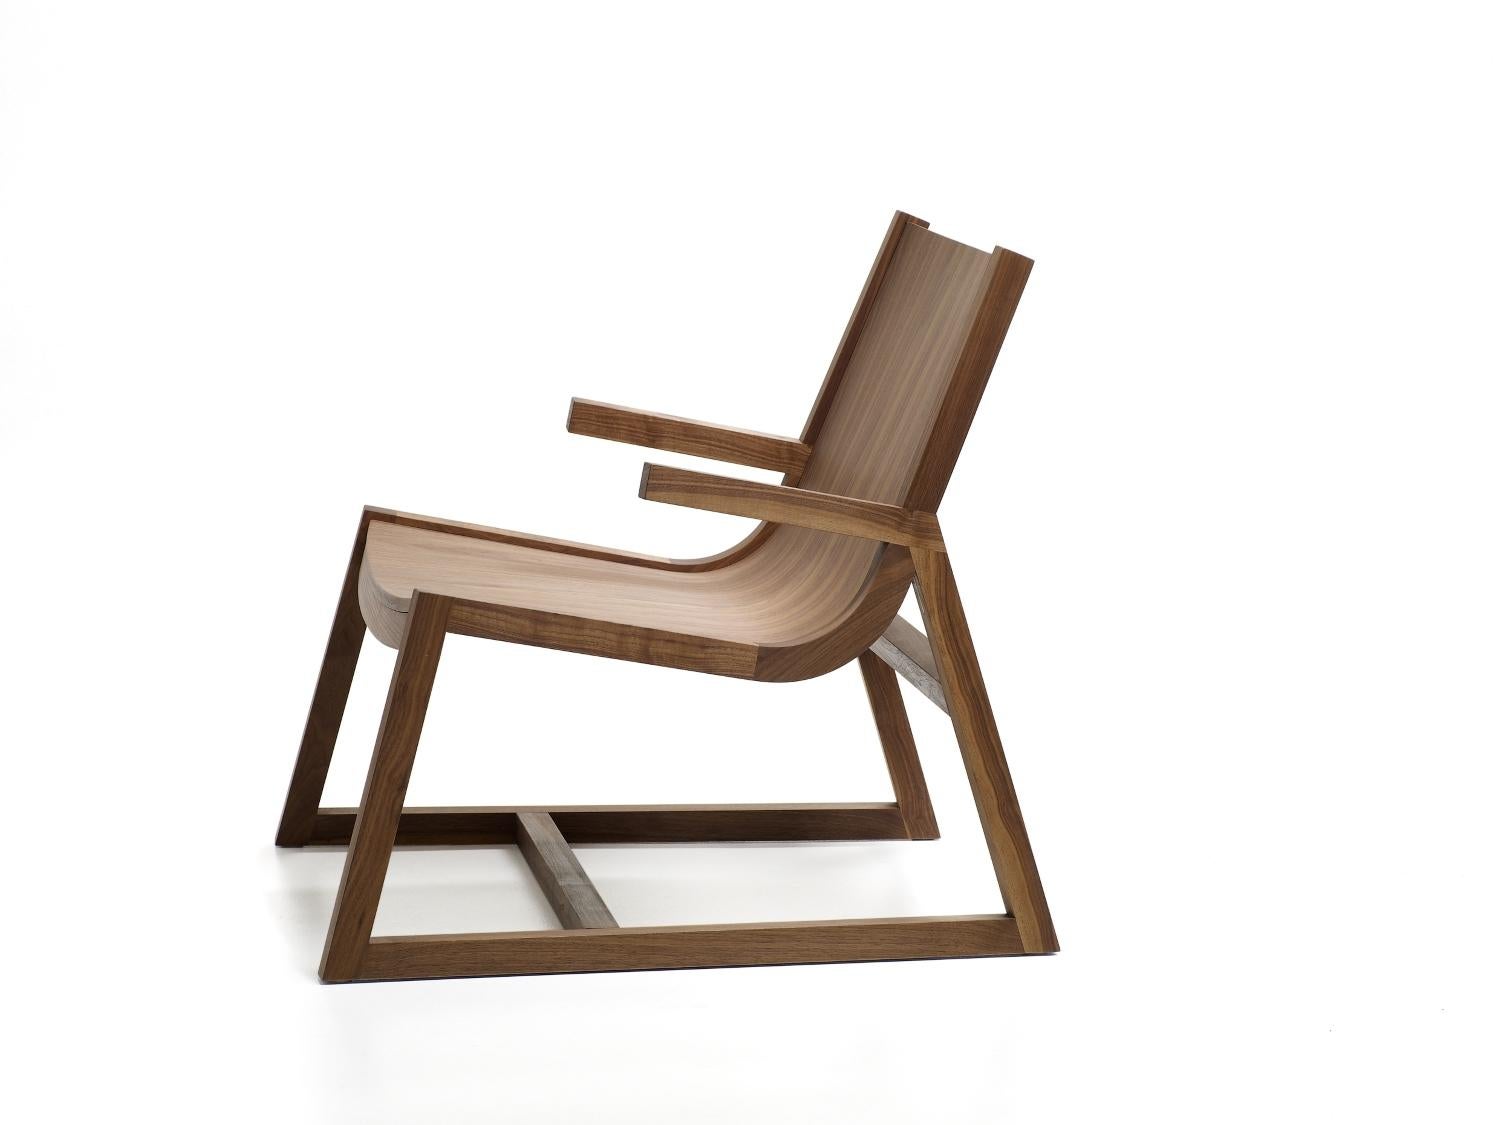 The Umber chair is a comfortable modern walnut armchair with crafted arm design detail. Designed to sit comfortably in its own space, the Umber chair offers a low, laid-back sitting position for relaxed enjoyment. Perfect as a wooden easy chair for